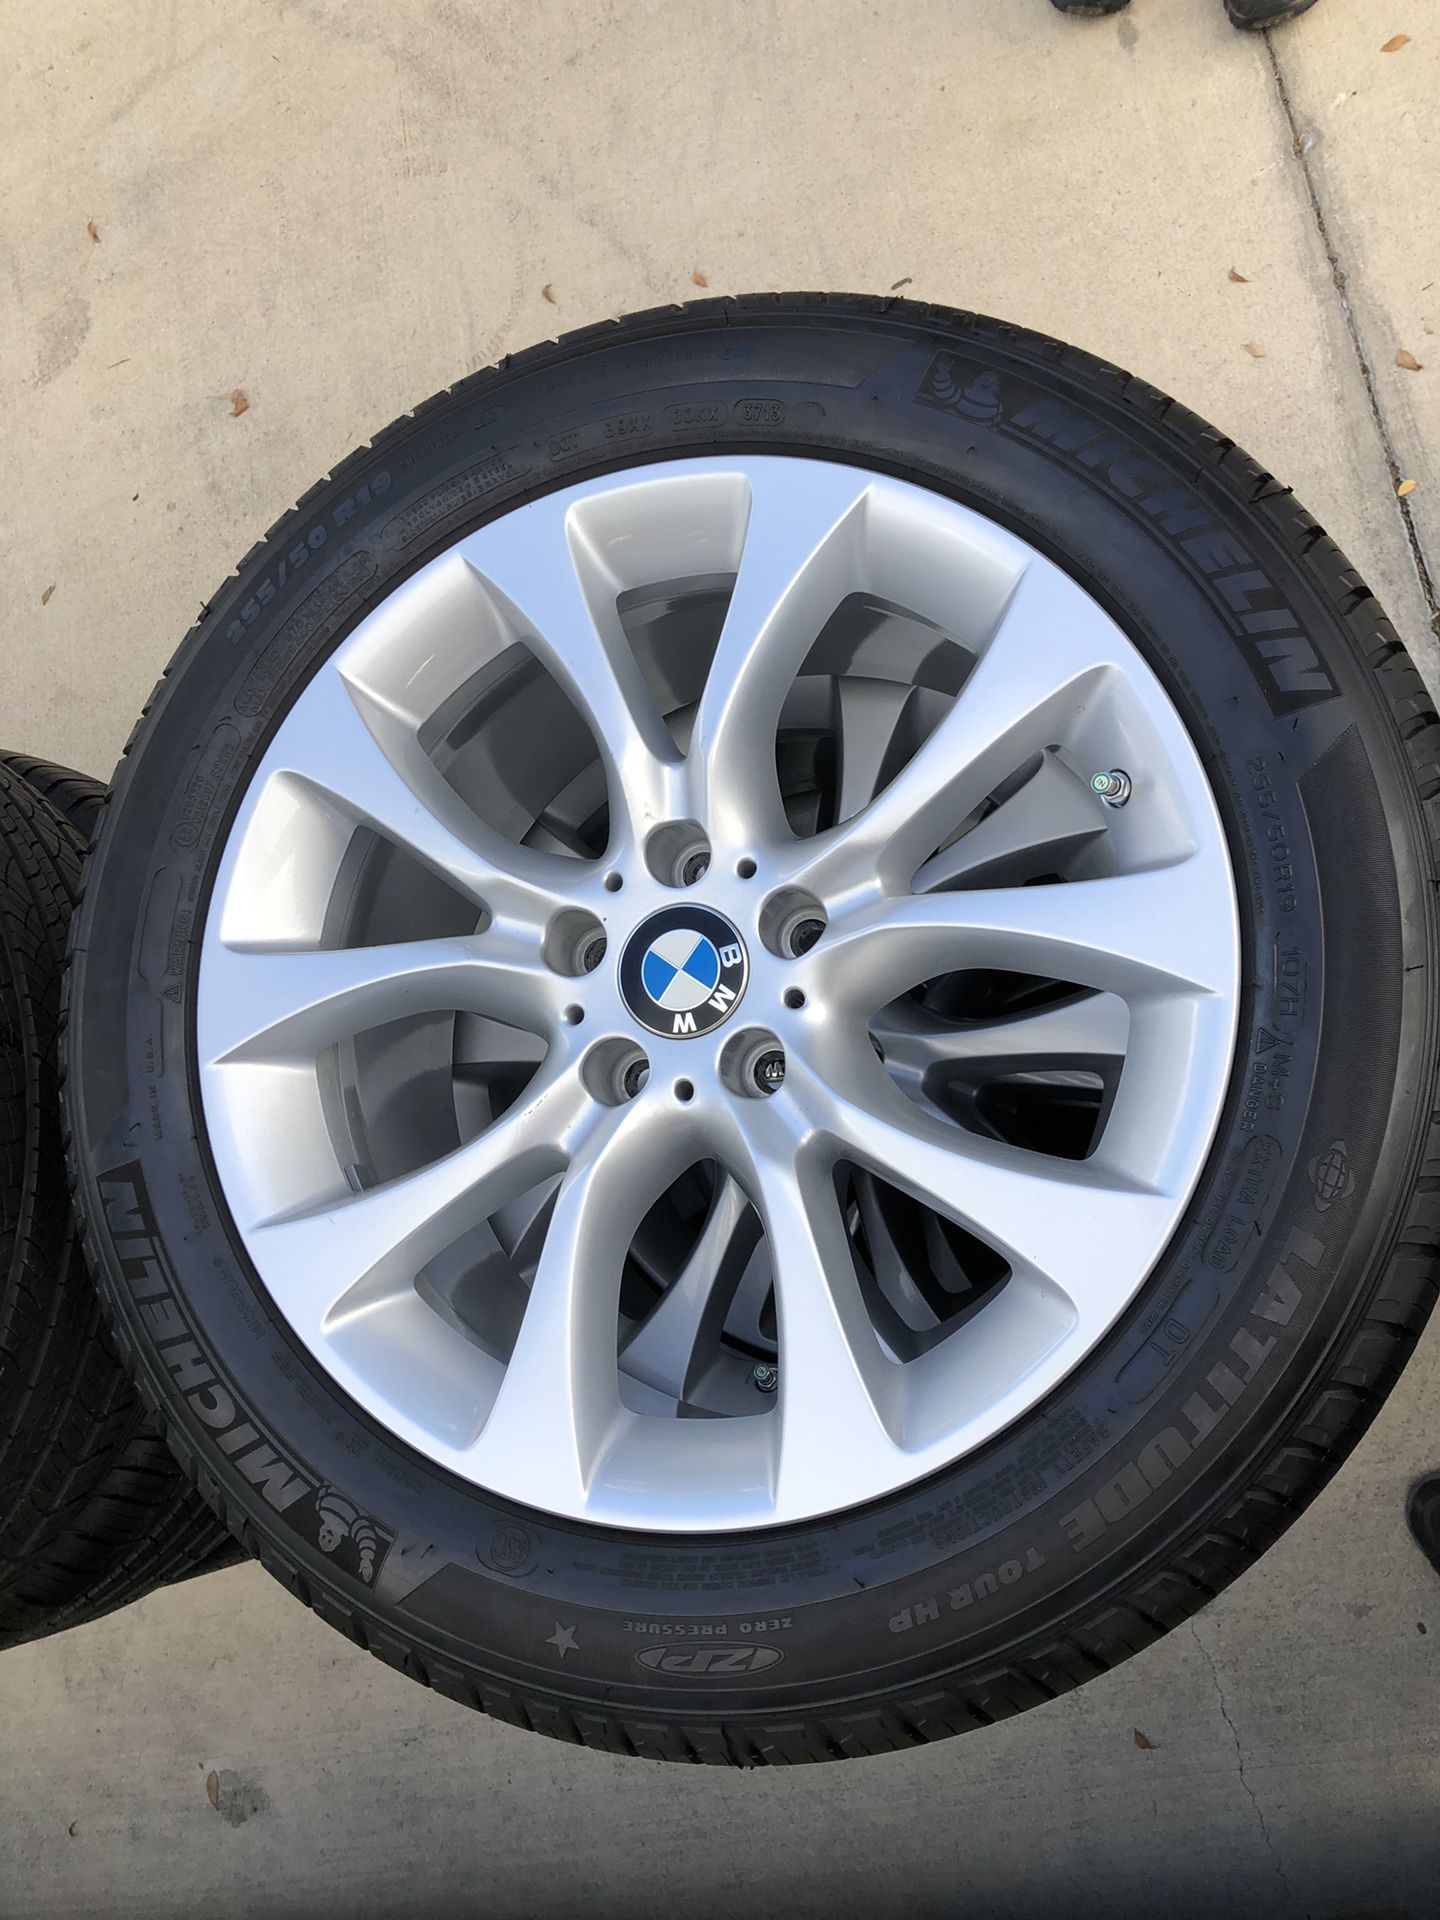 255/50R19 Michelin tires and BMW X5 rims